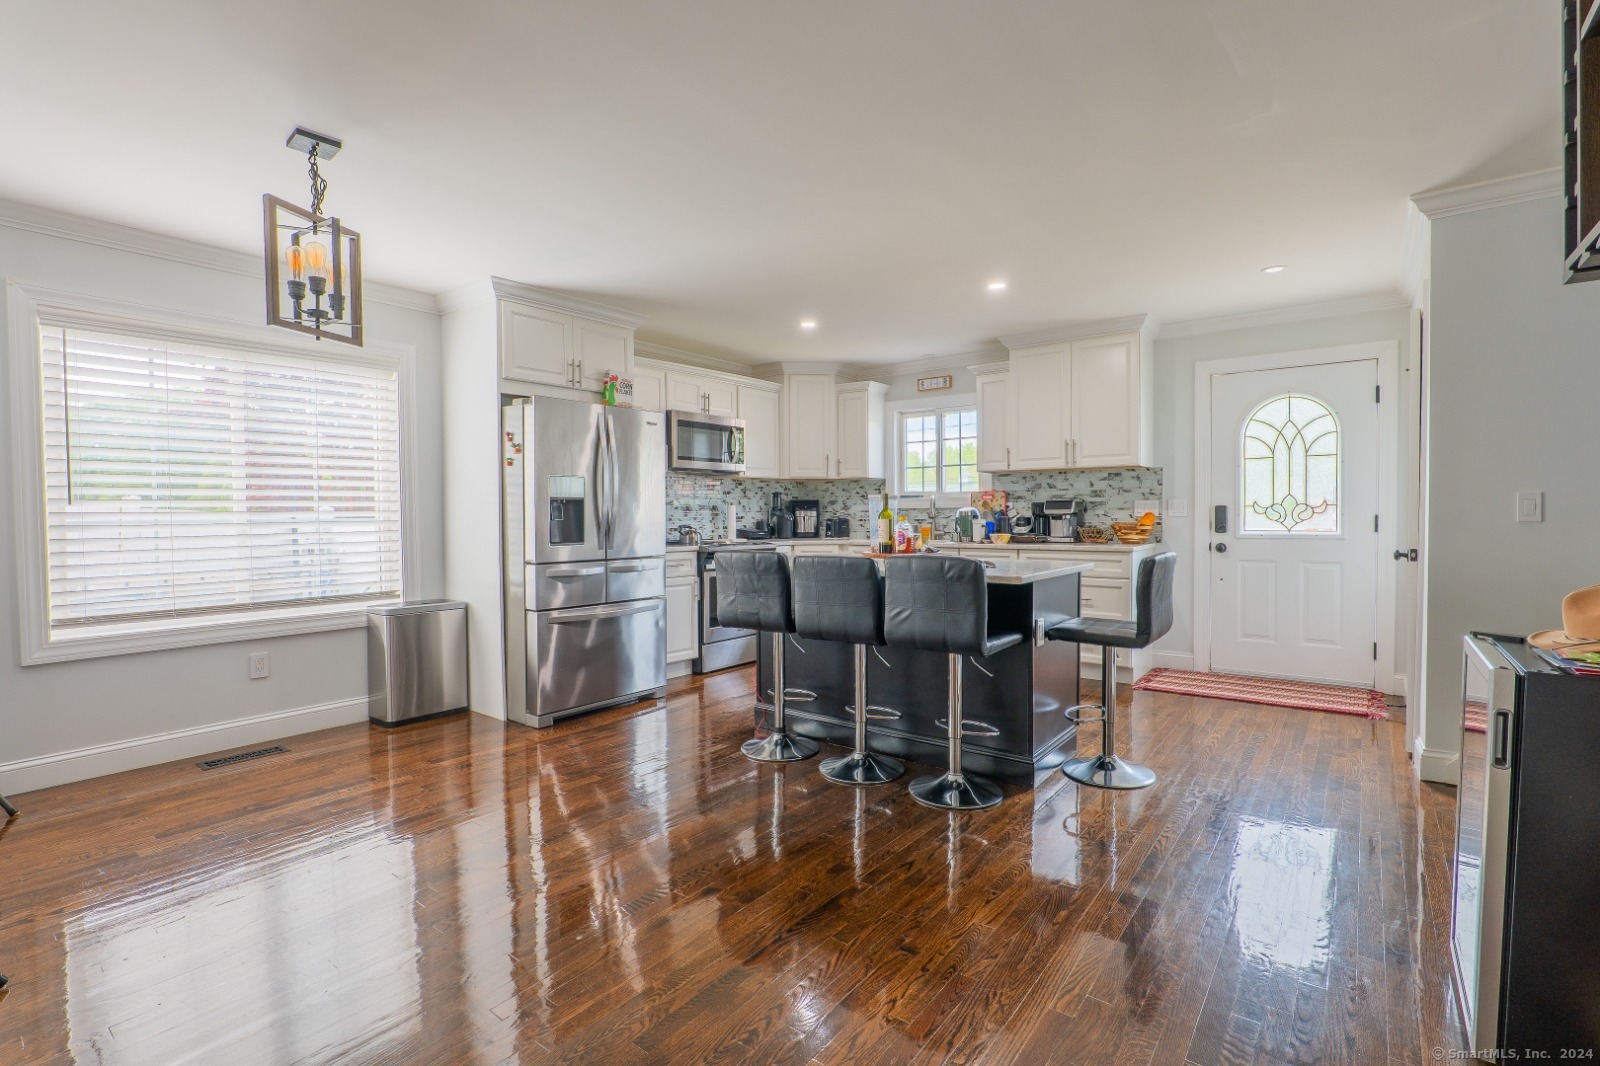 a open dining room with stainless steel appliances kitchen island granite countertop a refrigerator a stove a dining table and chairs with wooden floor